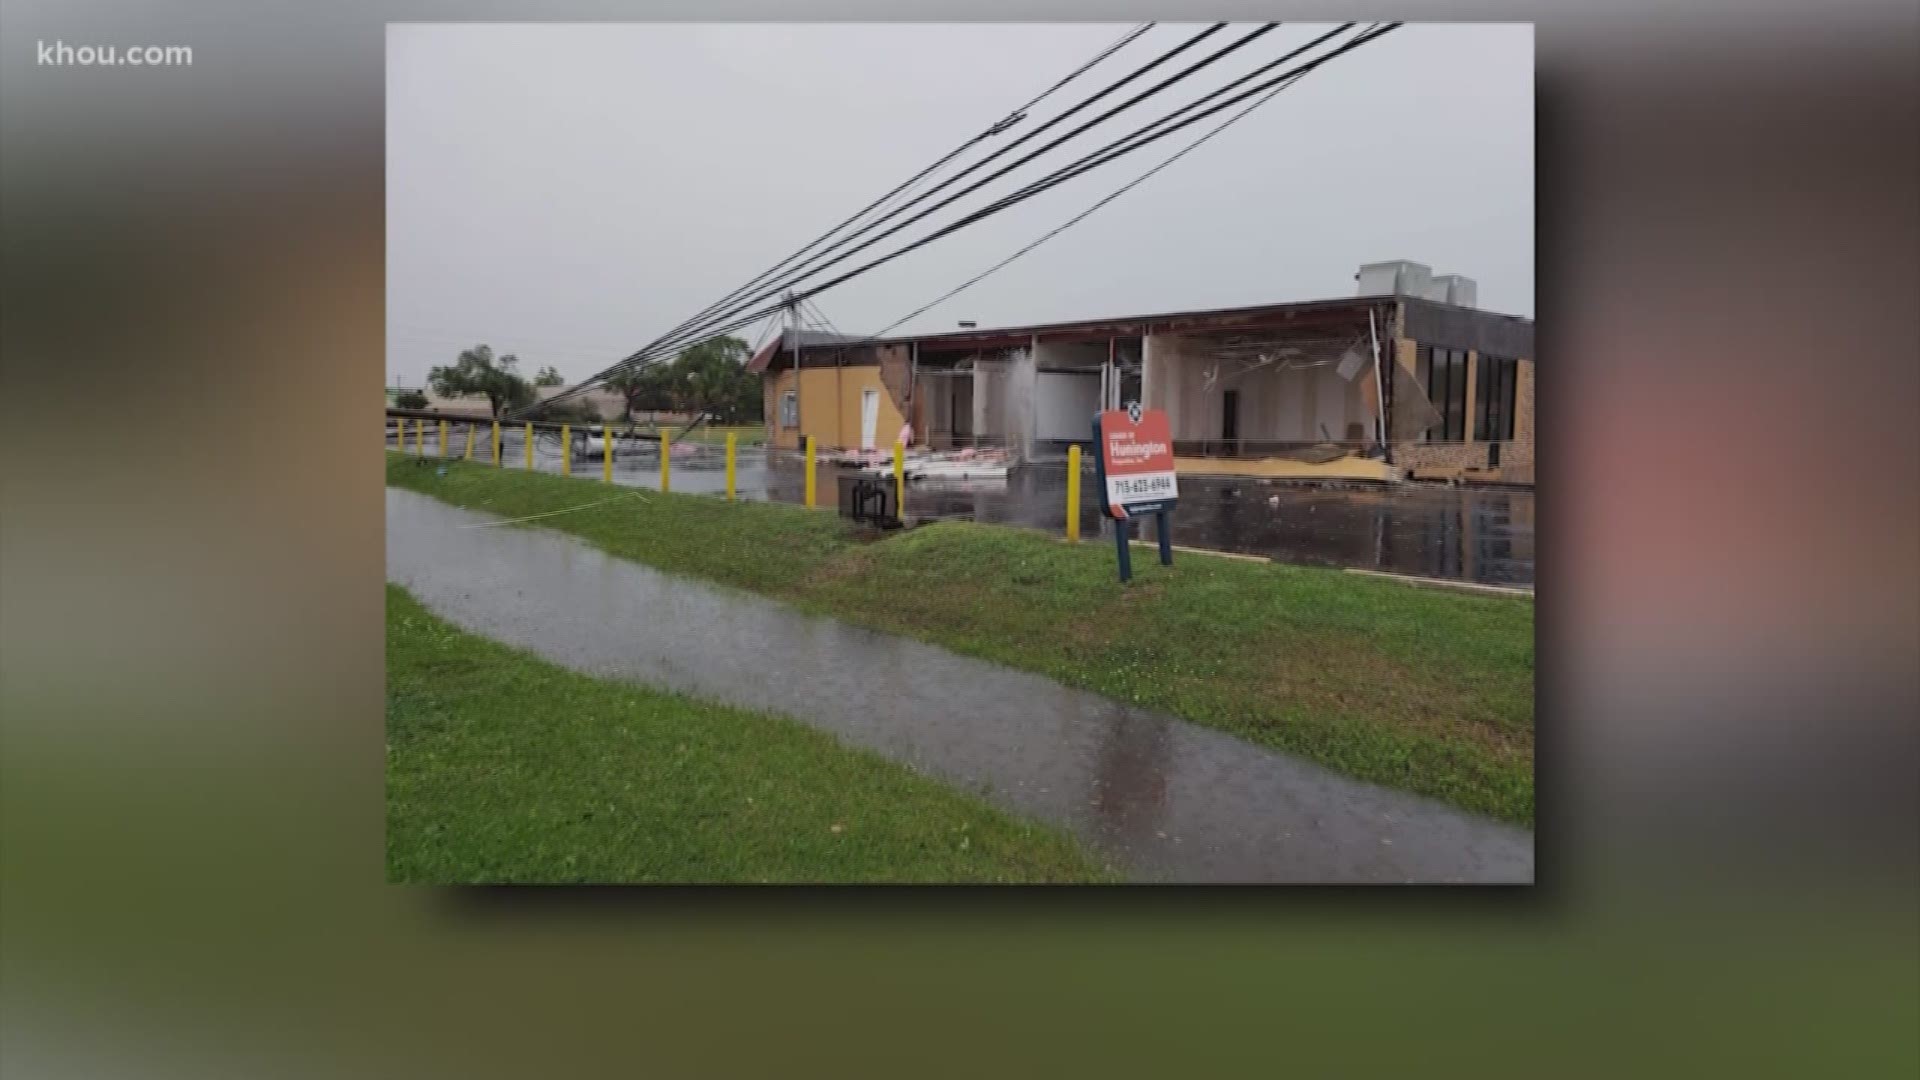 The National Weather Service confirms that some of the damage from Sunday's storms was caused by a tornado. The EF-1 tornado touched down in Pasadena.